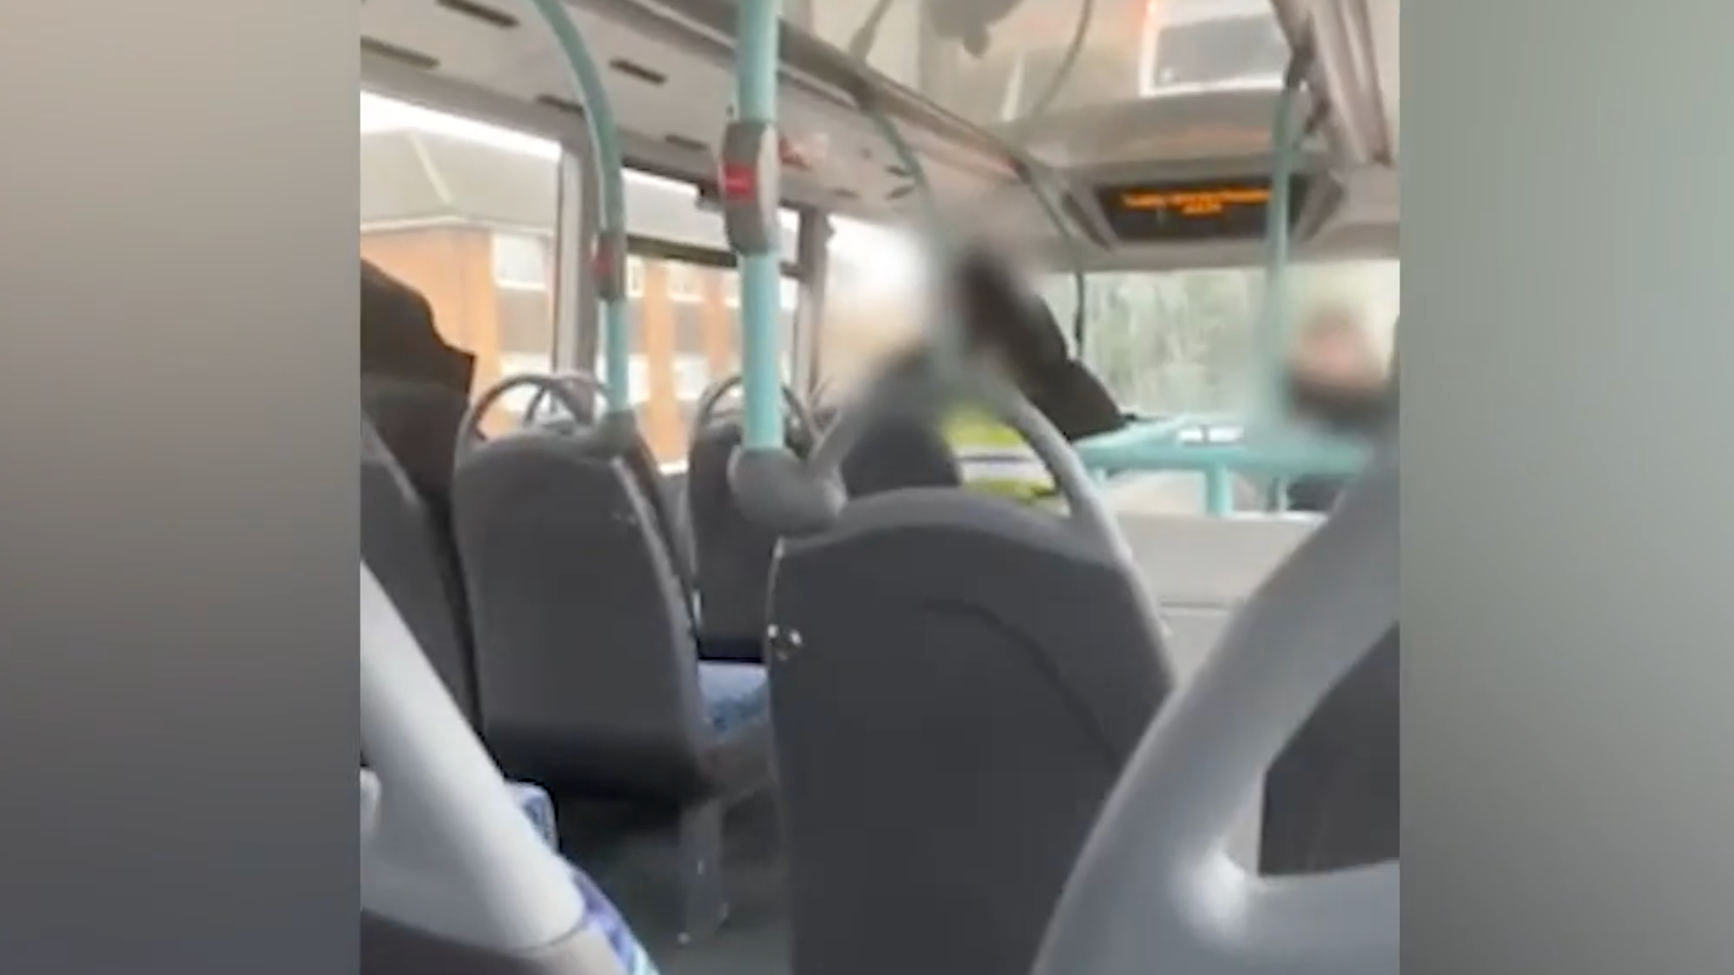 Forced Sex In Bus - Schoolgirl, 13, 'punched and kicked by woman' in terrifying West London bus  attack | ITV News London